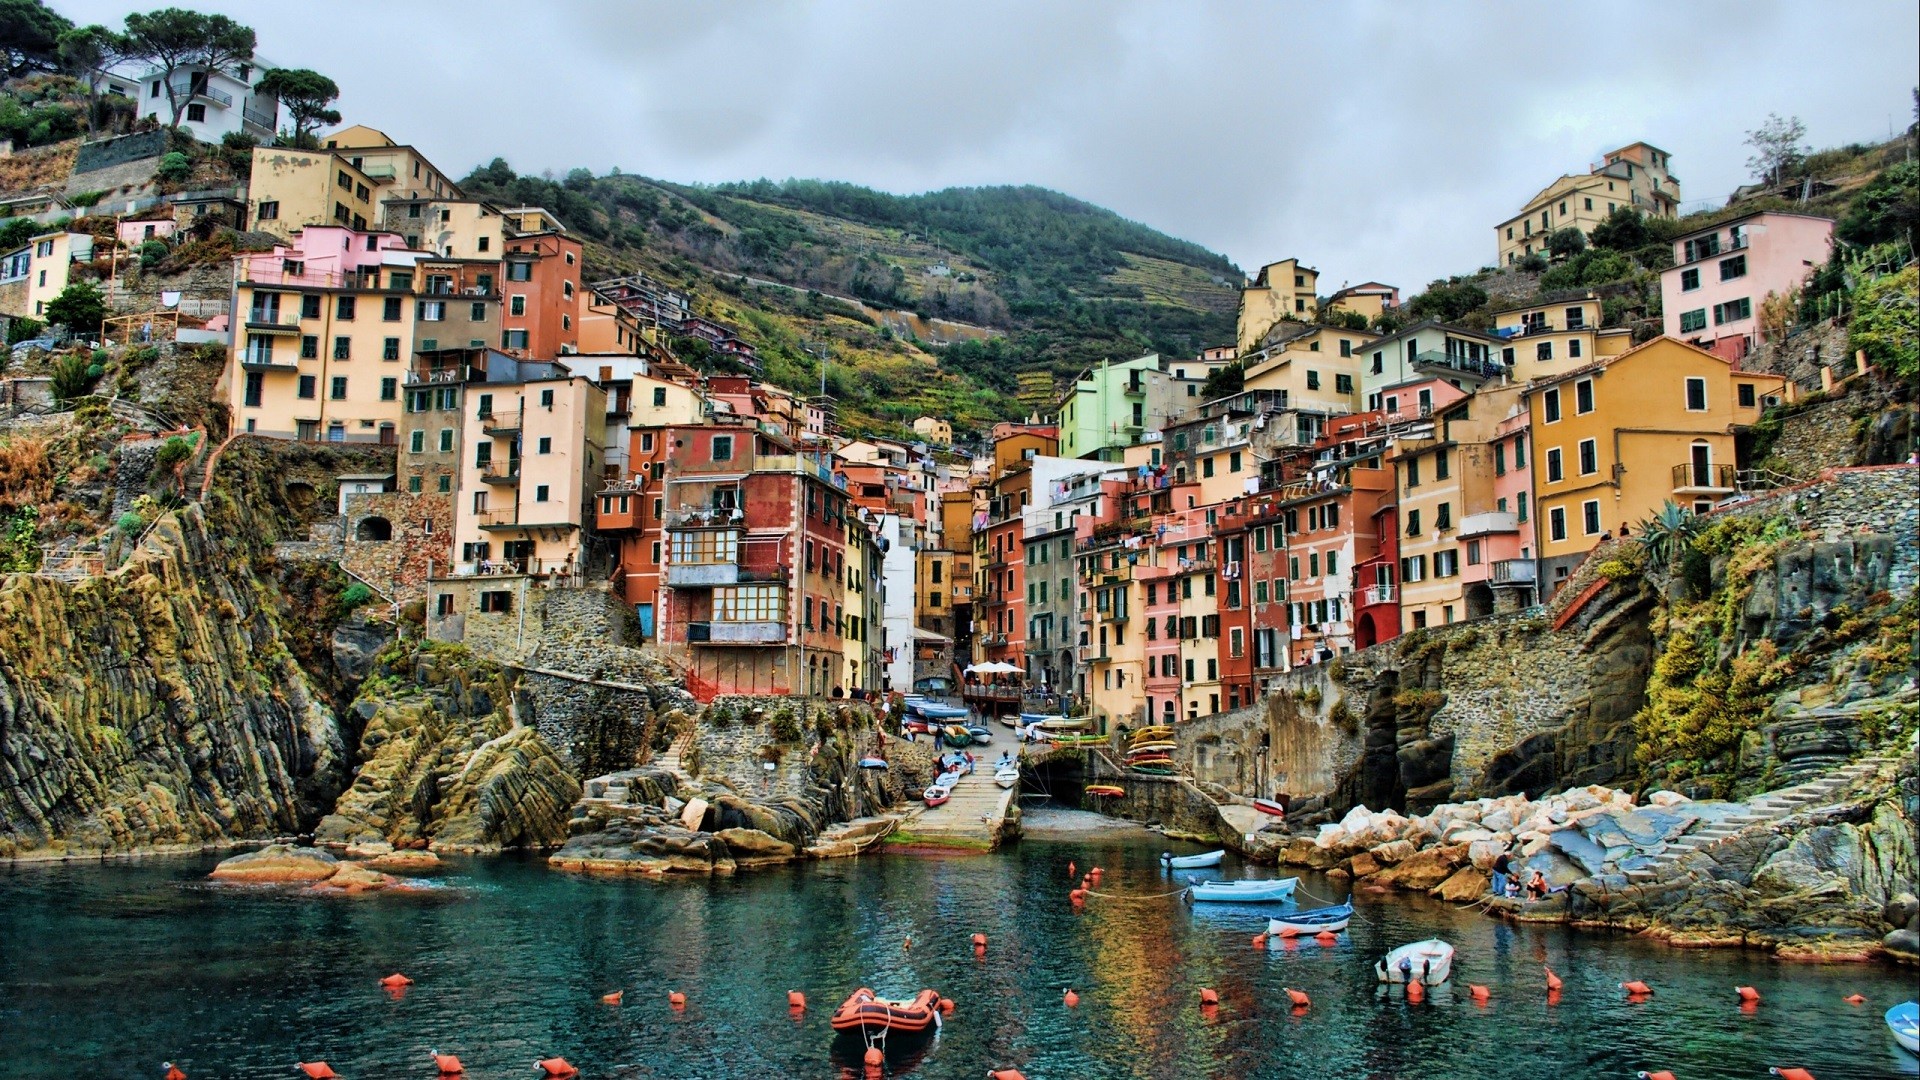 General 1920x1080 Cinque Terre Italy sea hills building house HDR colorful Europe coast boat cliff rocks town